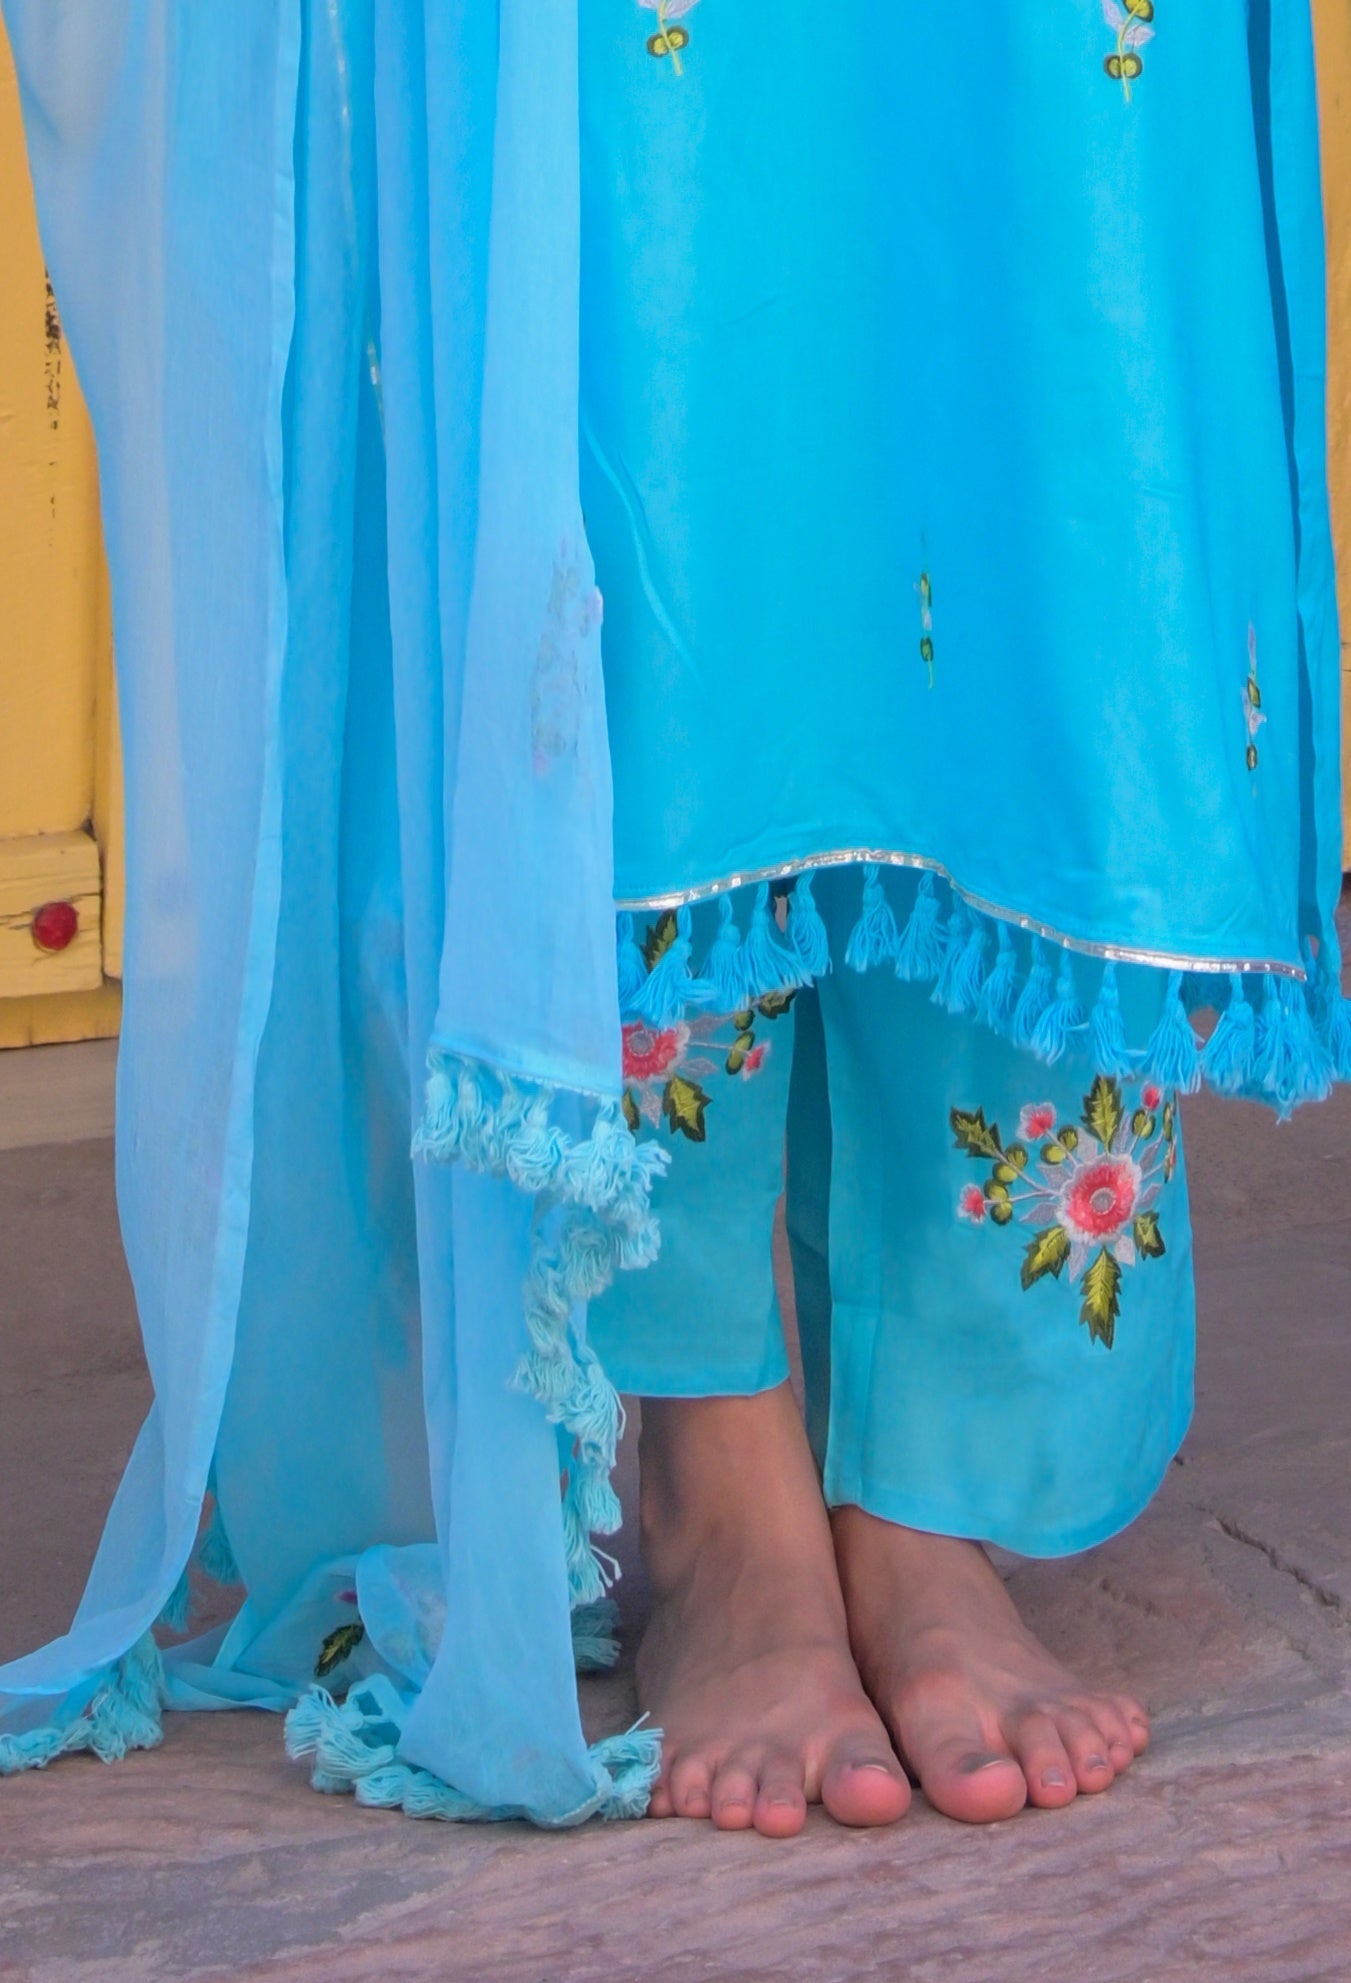 Women Blue Embroidered Kurta with Trousers Dupatta